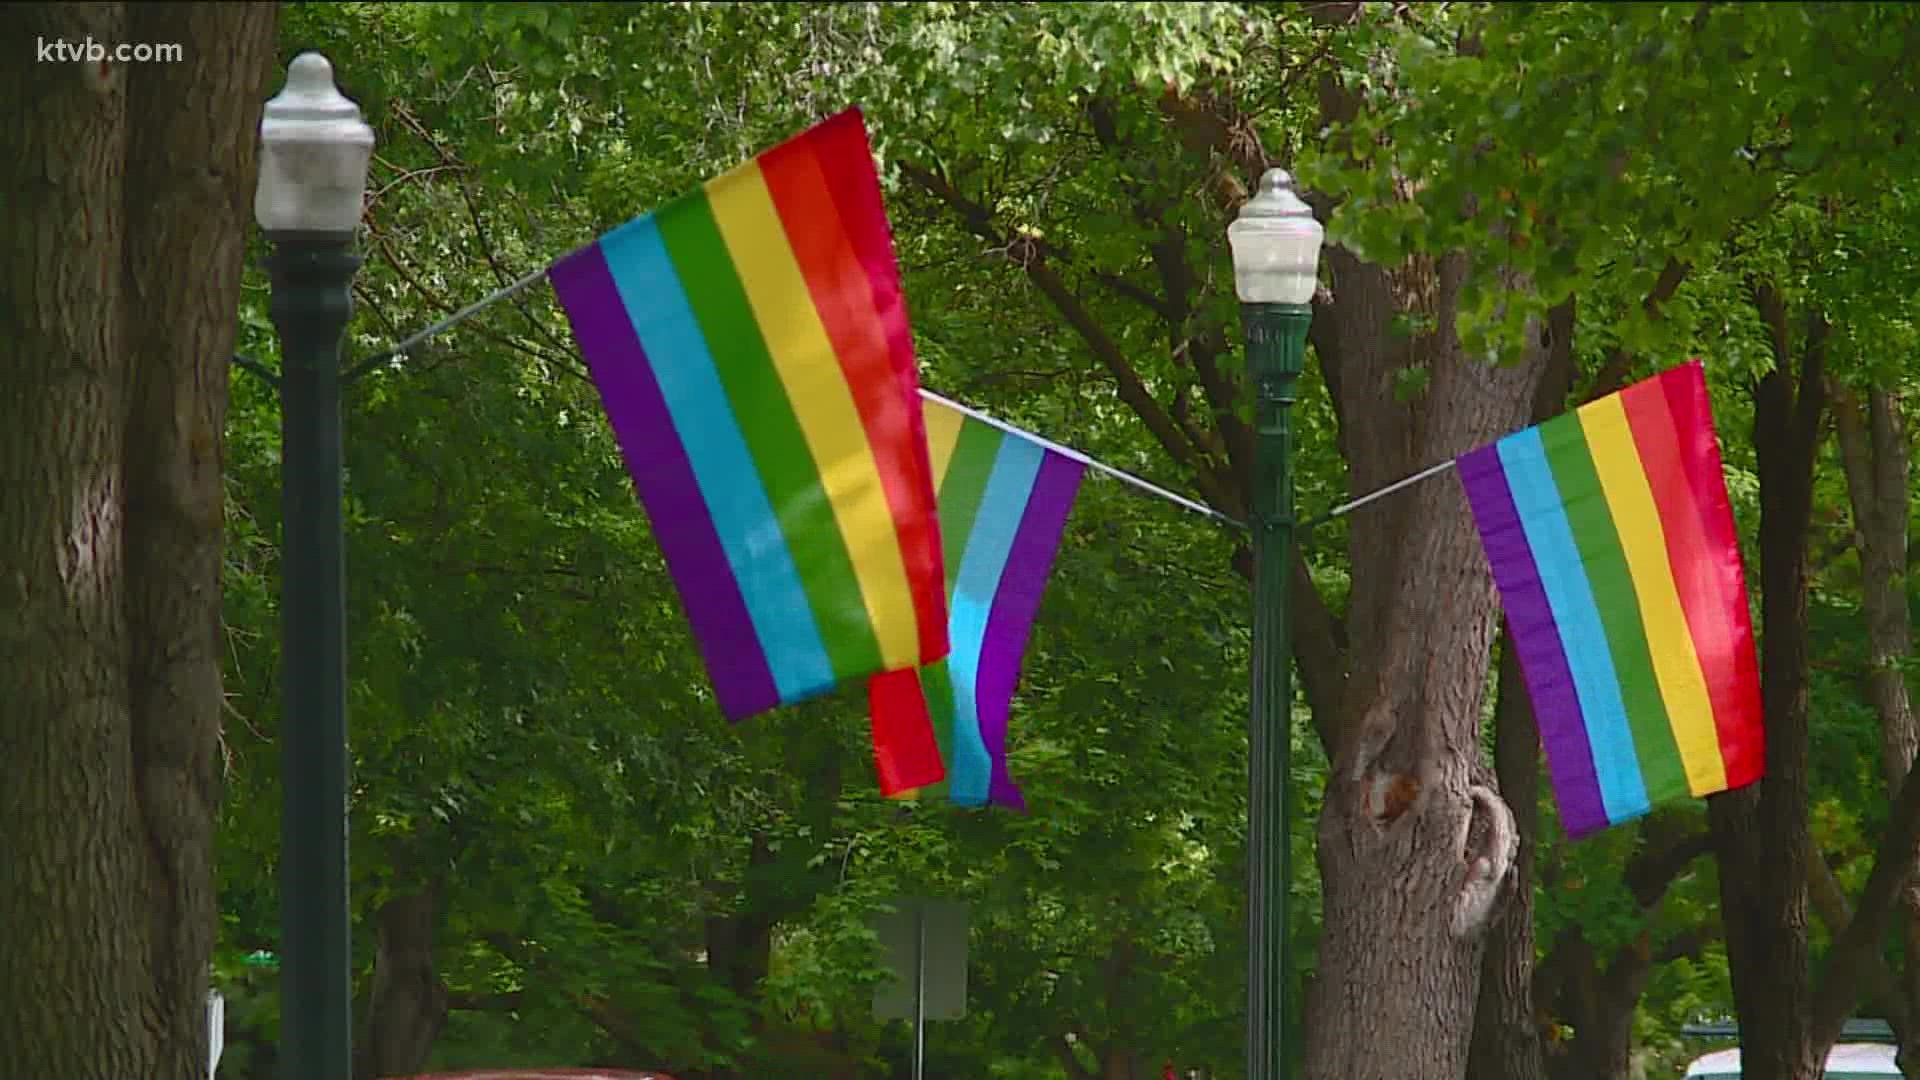 On Wednesday, Boise Police counted 21 missing Pride flags from Harrison Boulevard. An additional flag was damaged. An into the incident investigation is underway.